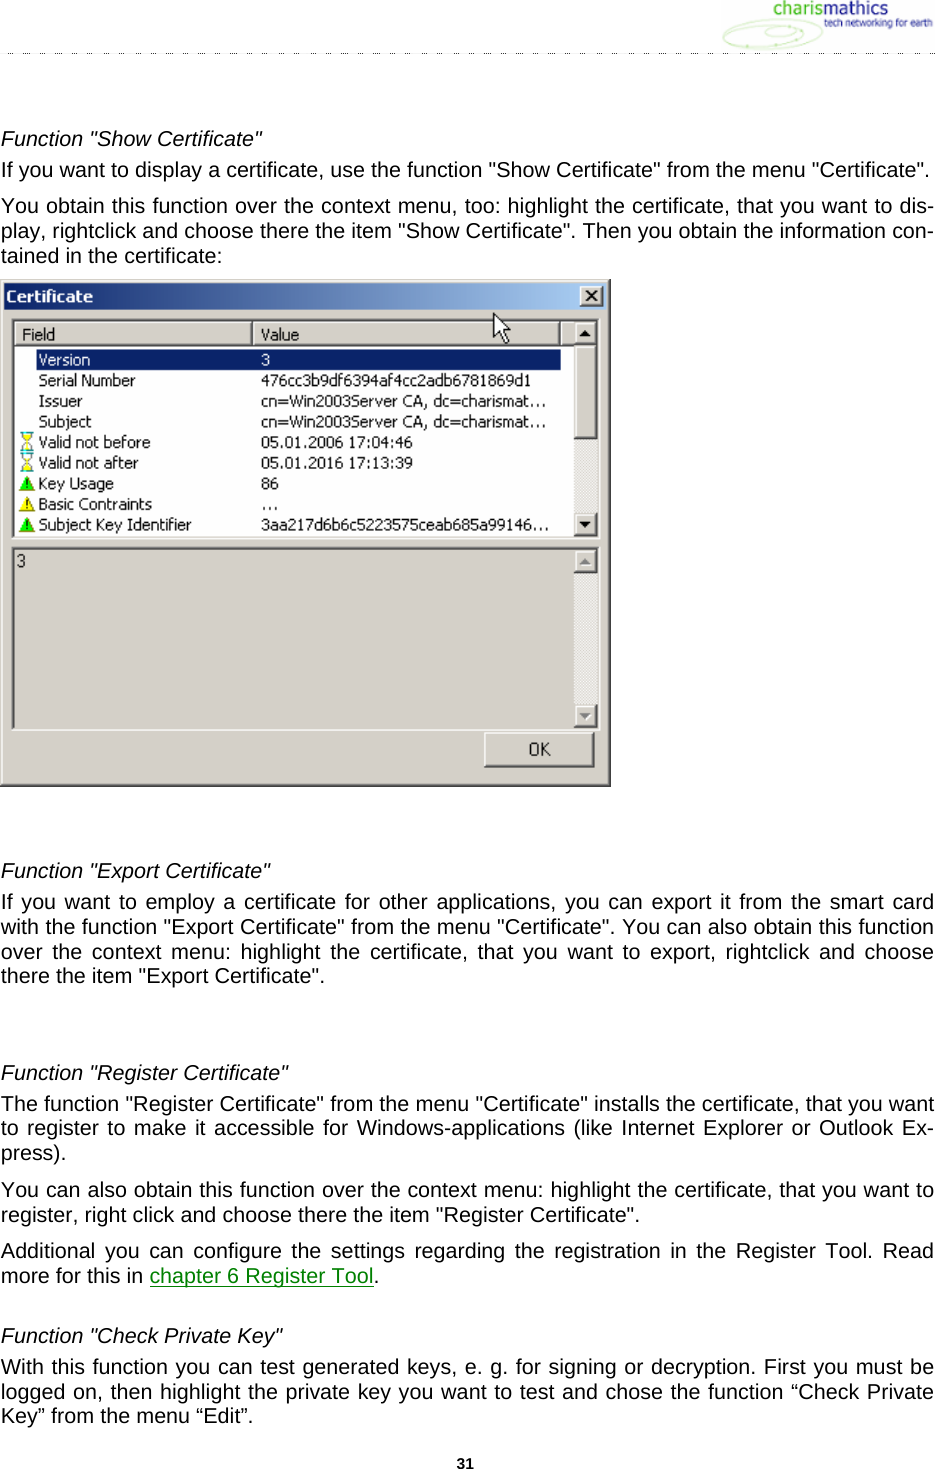     31Function &quot;Show Certificate&quot; If you want to display a certificate, use the function &quot;Show Certificate&quot; from the menu &quot;Certificate&quot;.  You obtain this function over the context menu, too: highlight the certificate, that you want to dis-play, rightclick and choose there the item &quot;Show Certificate&quot;. Then you obtain the information con-tained in the certificate:   Function &quot;Export Certificate&quot; If you want to employ a certificate for other applications, you can export it from the smart card with the function &quot;Export Certificate&quot; from the menu &quot;Certificate&quot;. You can also obtain this function over the context menu: highlight the certificate, that you want to export, rightclick and choose there the item &quot;Export Certificate&quot;.  Function &quot;Register Certificate&quot; The function &quot;Register Certificate&quot; from the menu &quot;Certificate&quot; installs the certificate, that you want to register to make it accessible for Windows-applications (like Internet Explorer or Outlook Ex-press). You can also obtain this function over the context menu: highlight the certificate, that you want to register, right click and choose there the item &quot;Register Certificate&quot;. Additional you can configure the settings regarding the registration in the Register Tool. Read more for this in chapter 6 Register Tool. Function &quot;Check Private Key&quot; With this function you can test generated keys, e. g. for signing or decryption. First you must be logged on, then highlight the private key you want to test and chose the function “Check Private Key” from the menu “Edit”. 